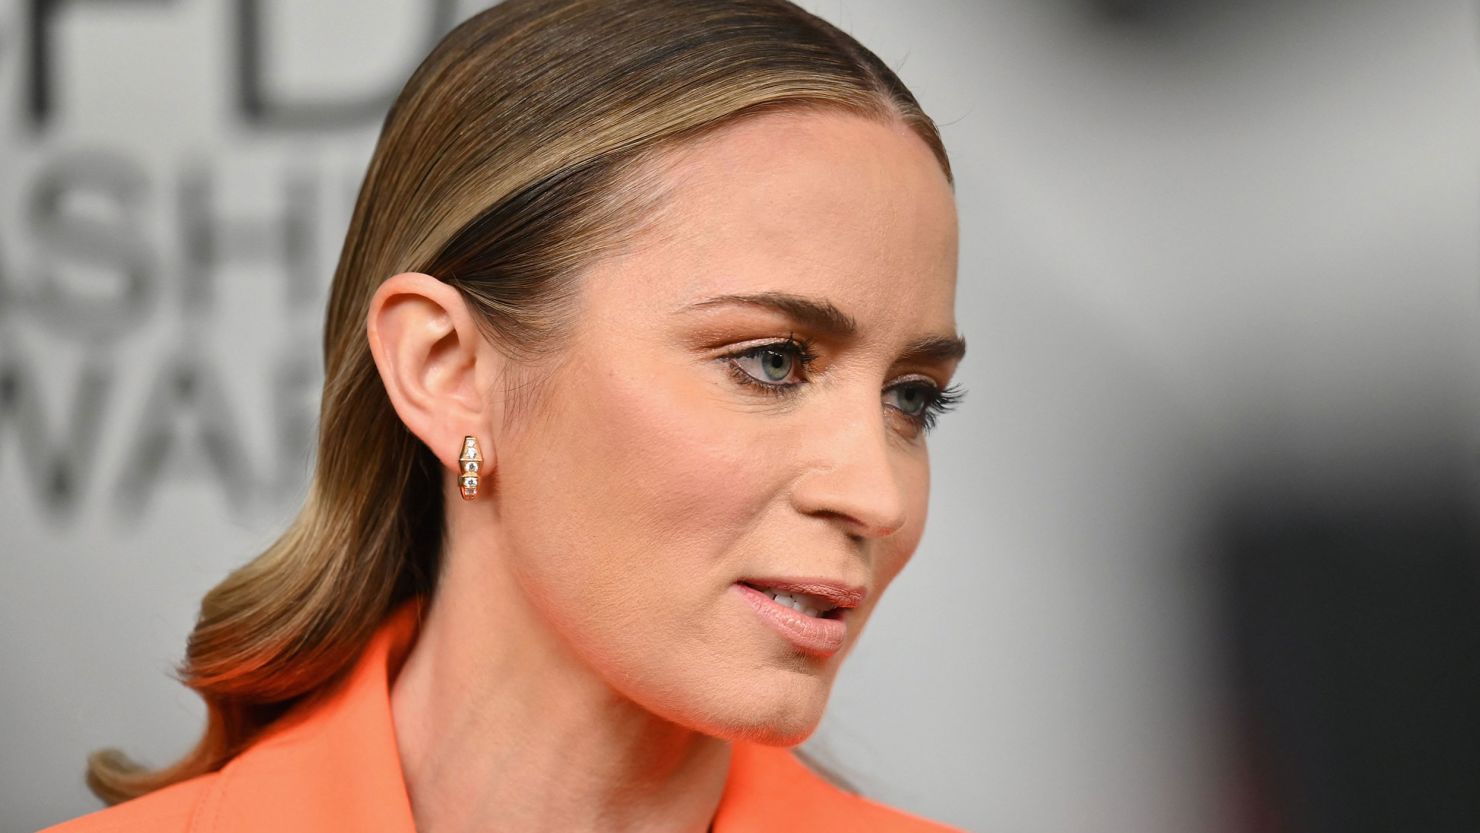 Emily Blunt opens up about growing up stuttering | CNN